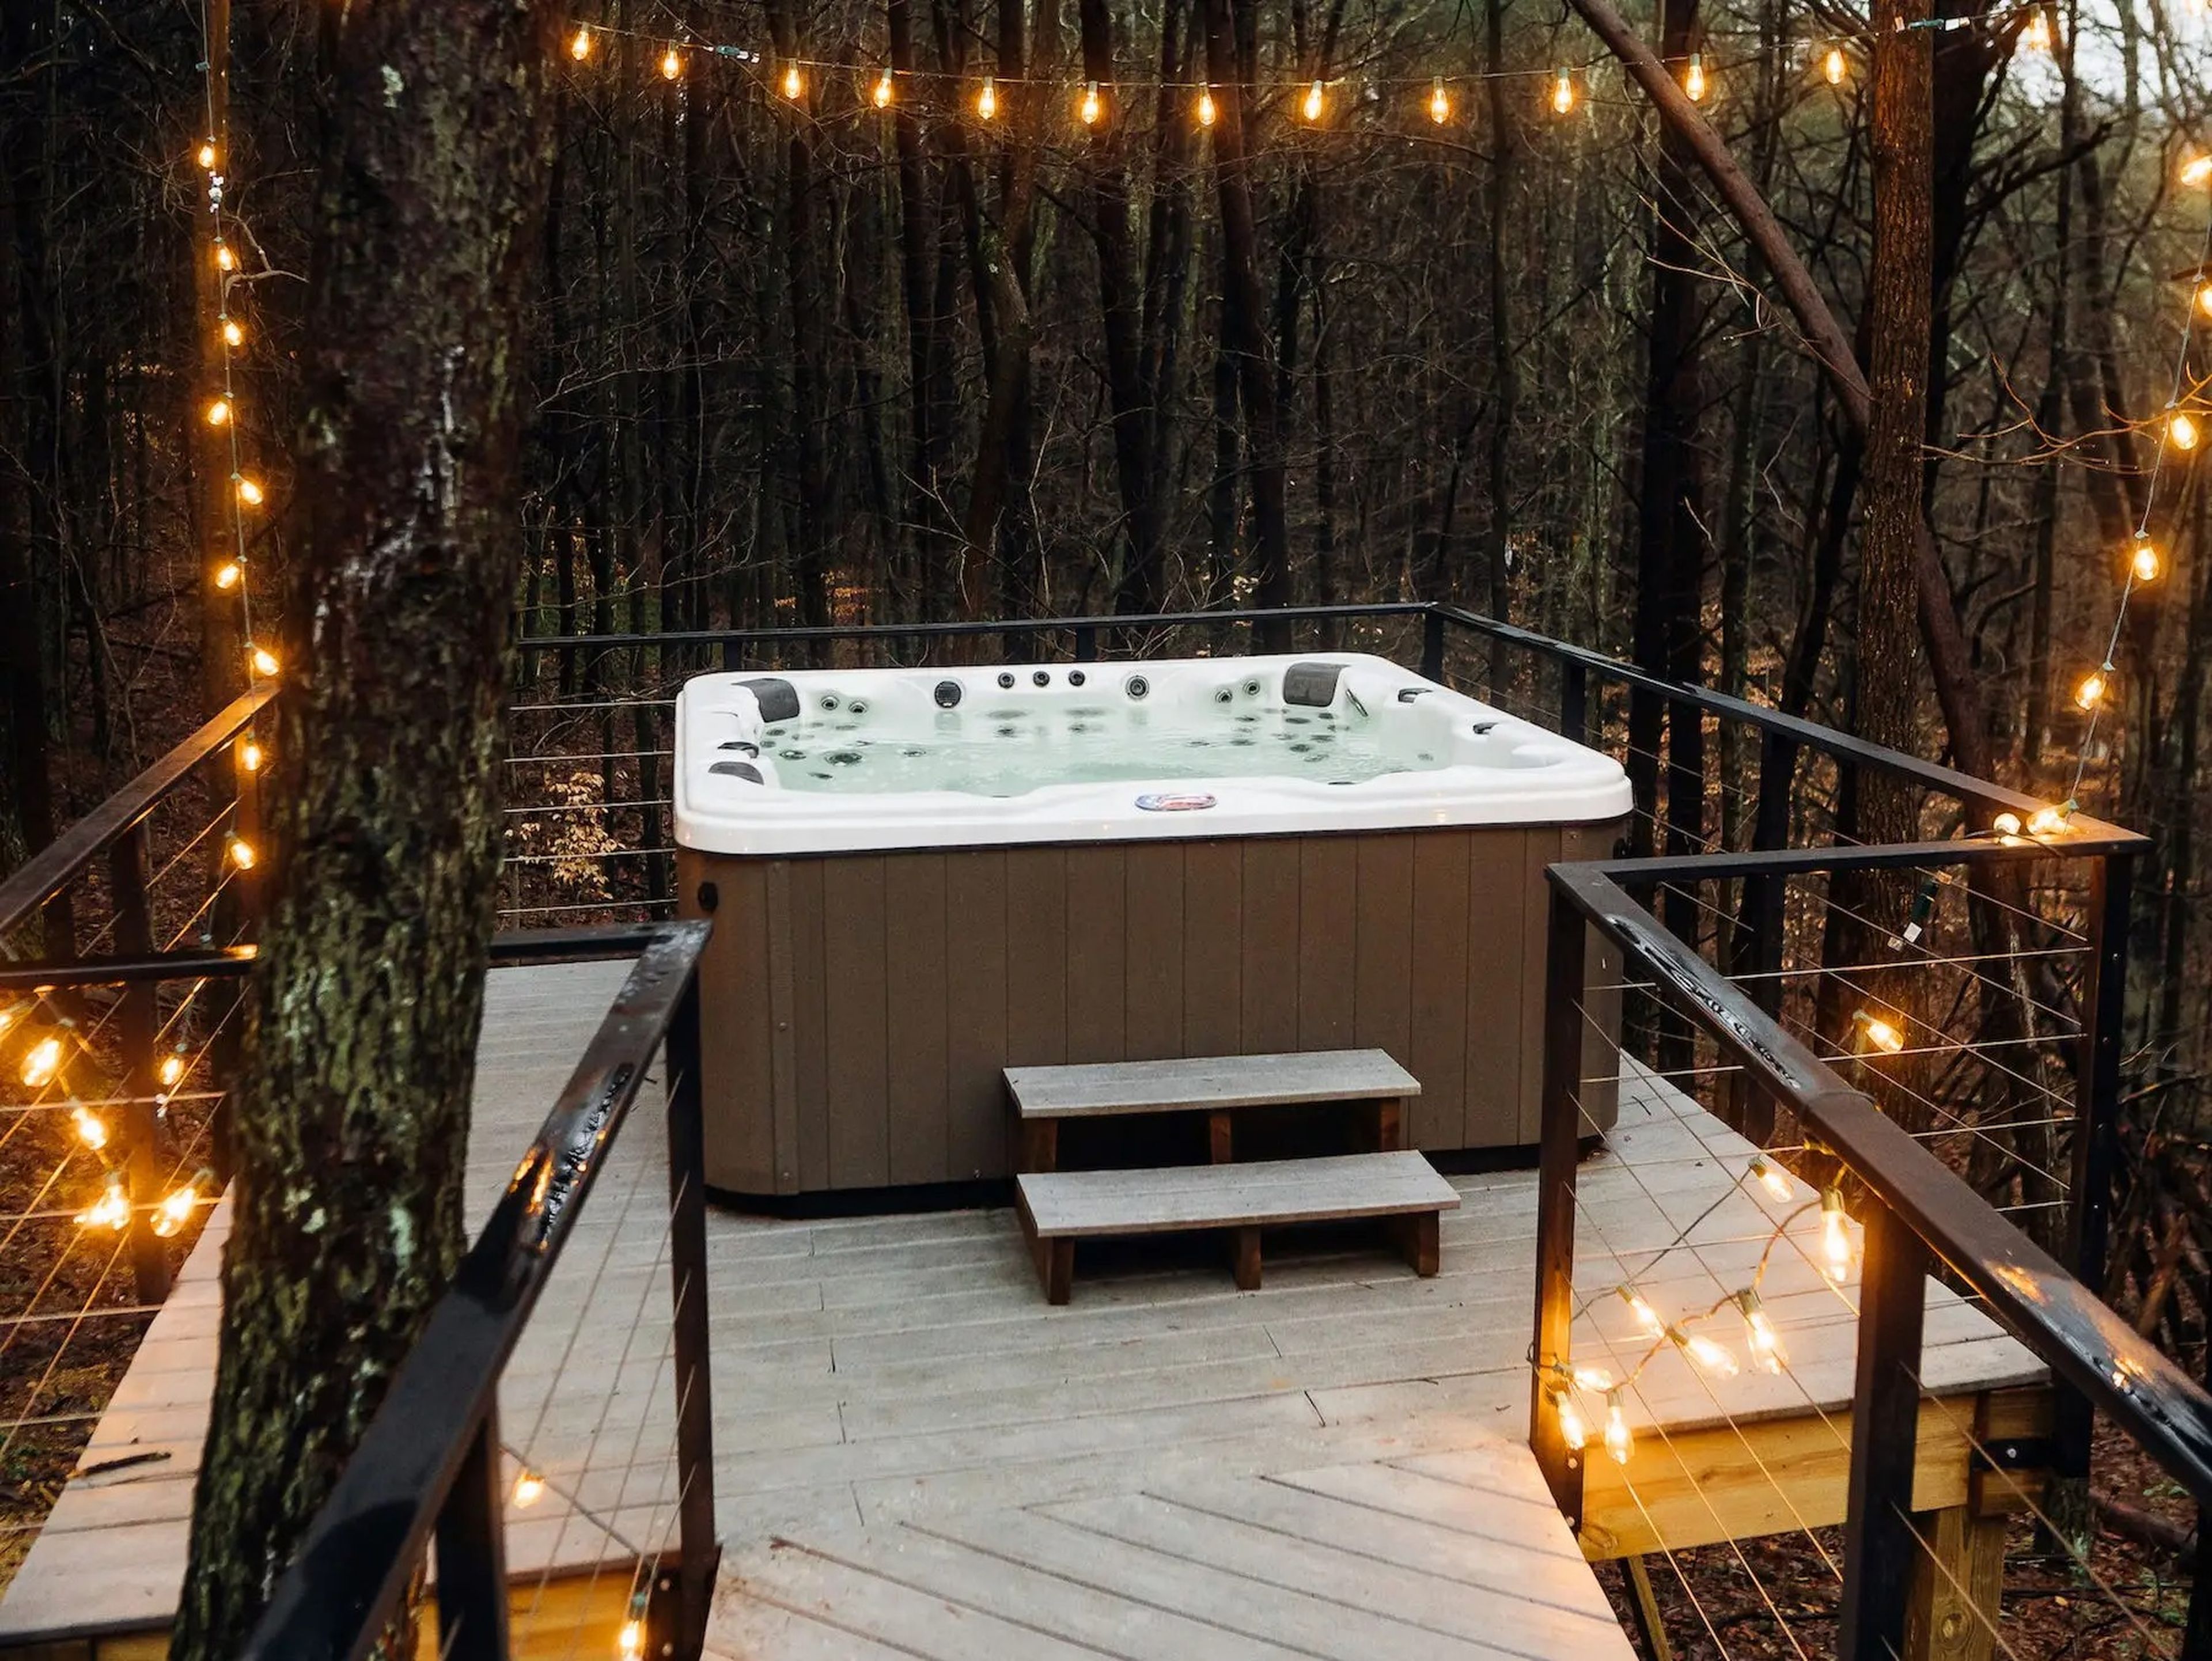 A Jacuzzi on a deck surrounded by string lights